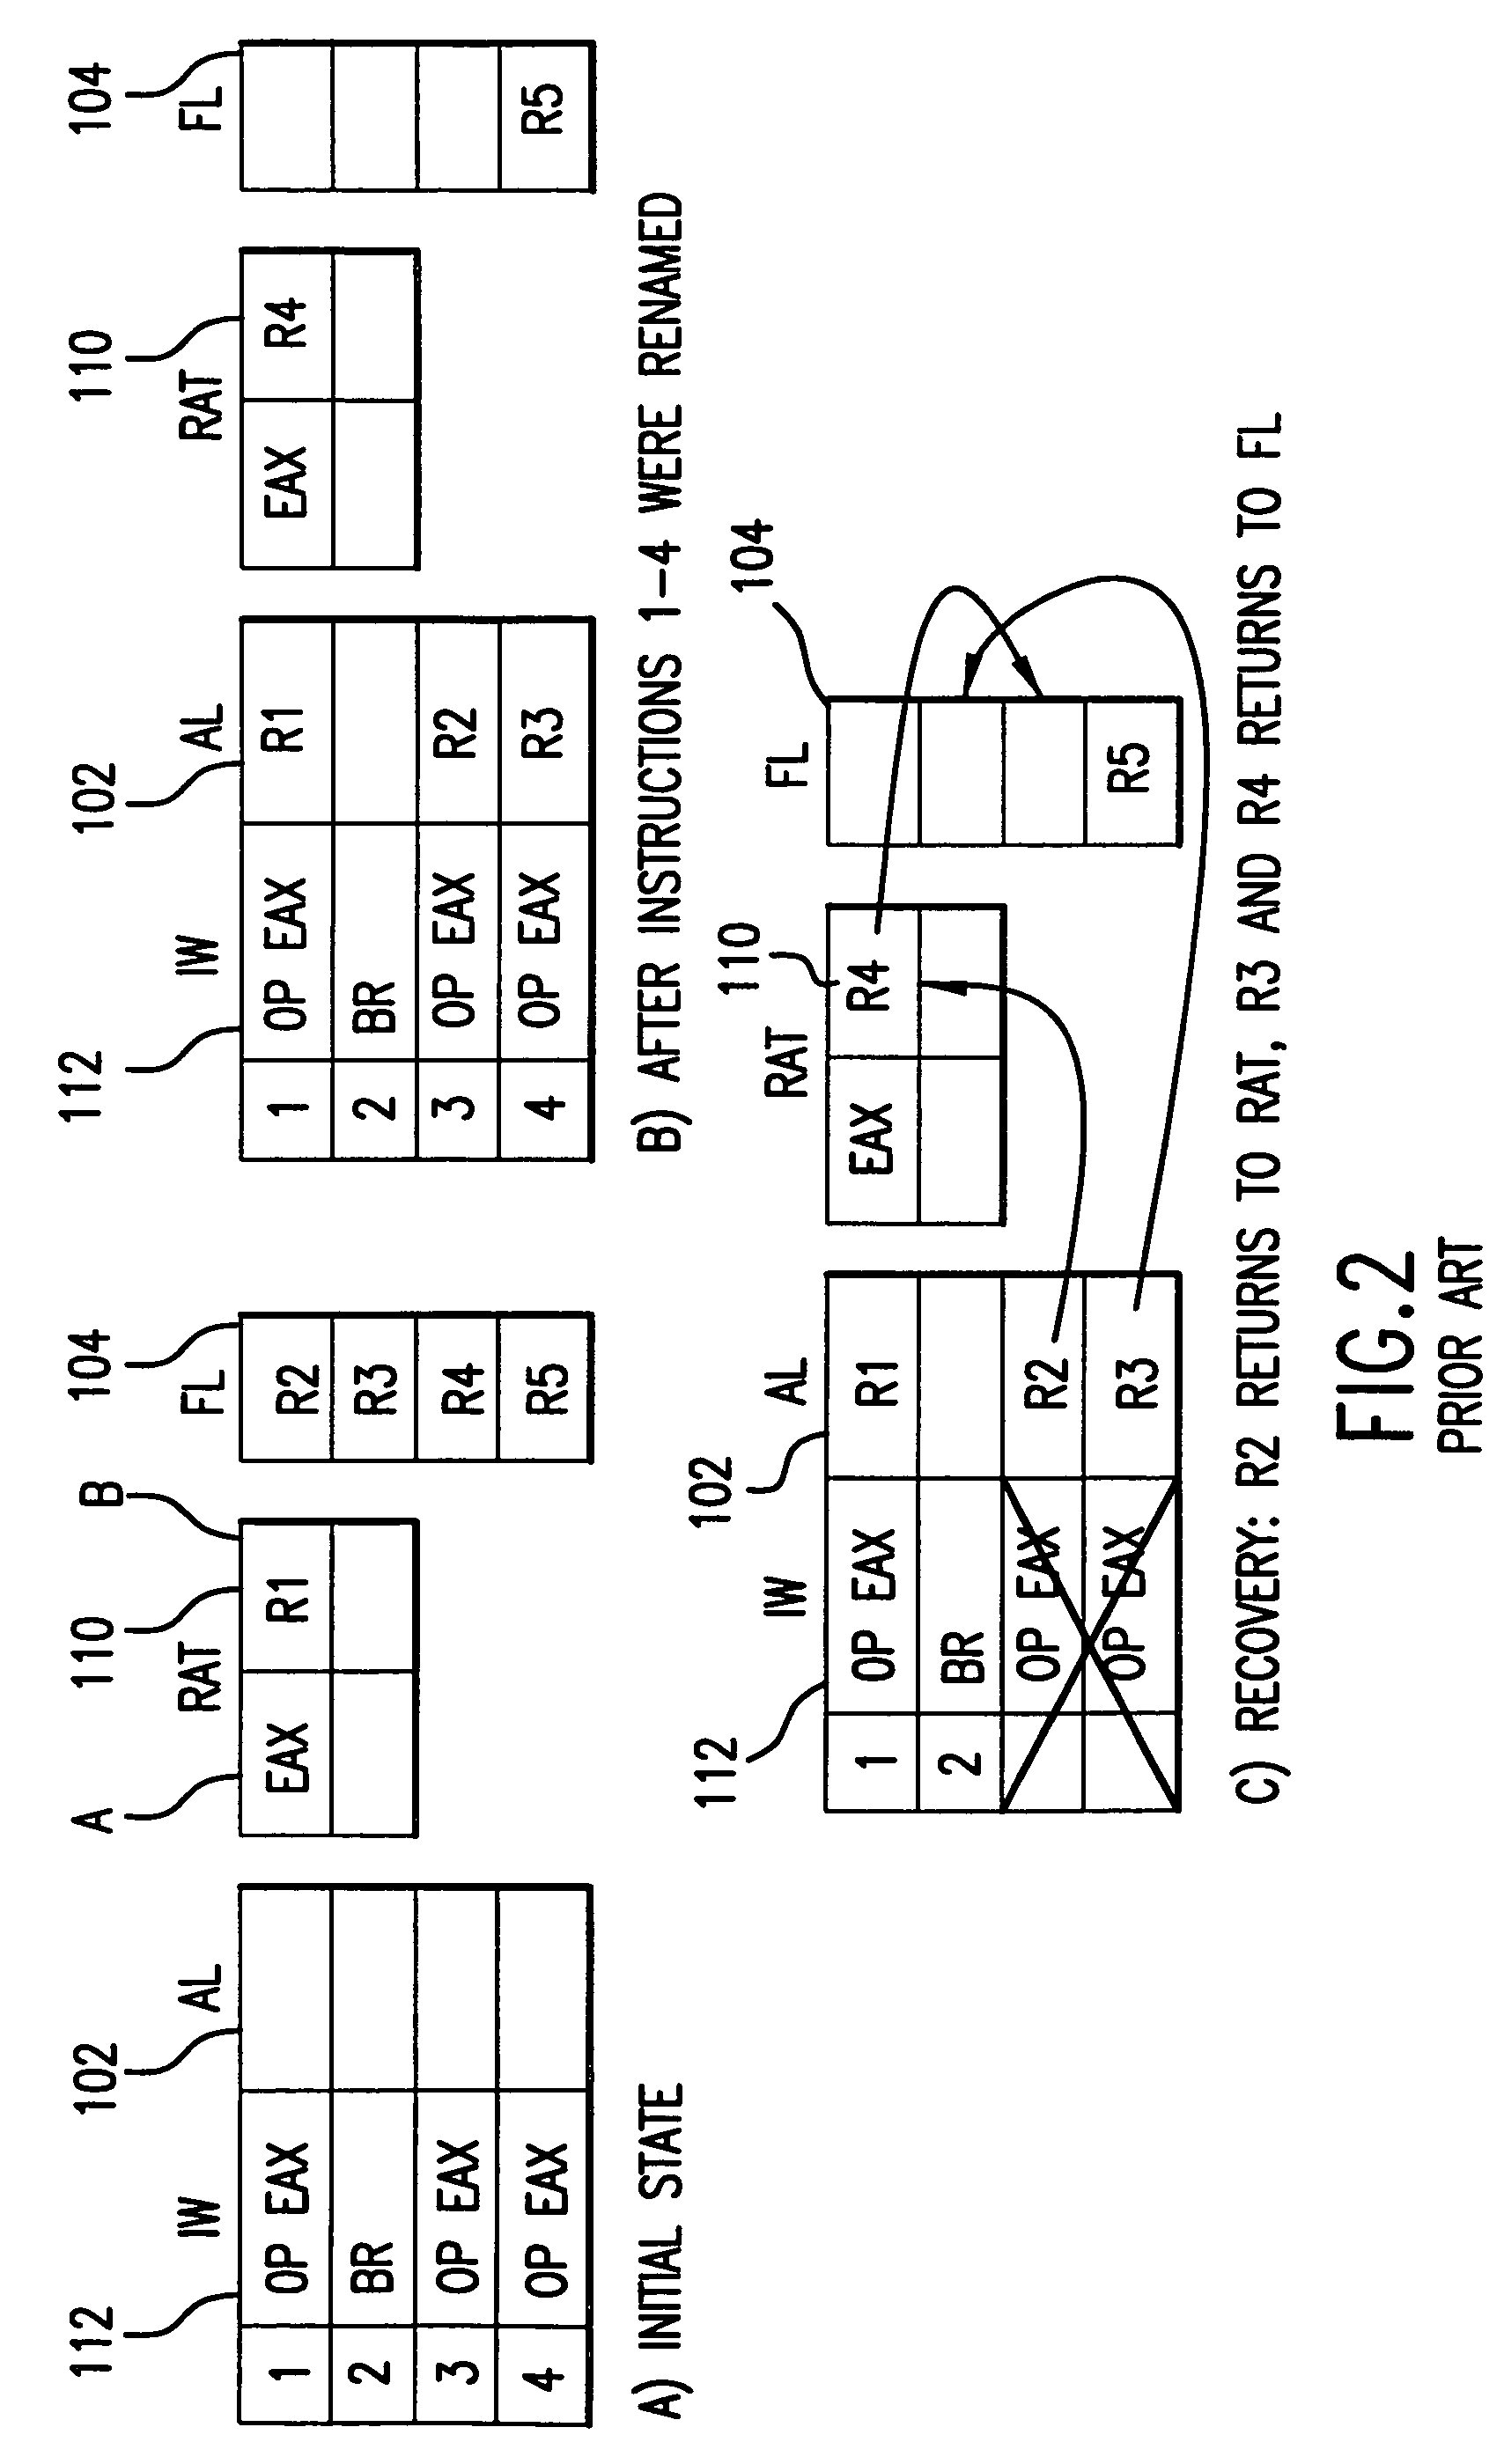 Method and apparatus for a register renaming structure